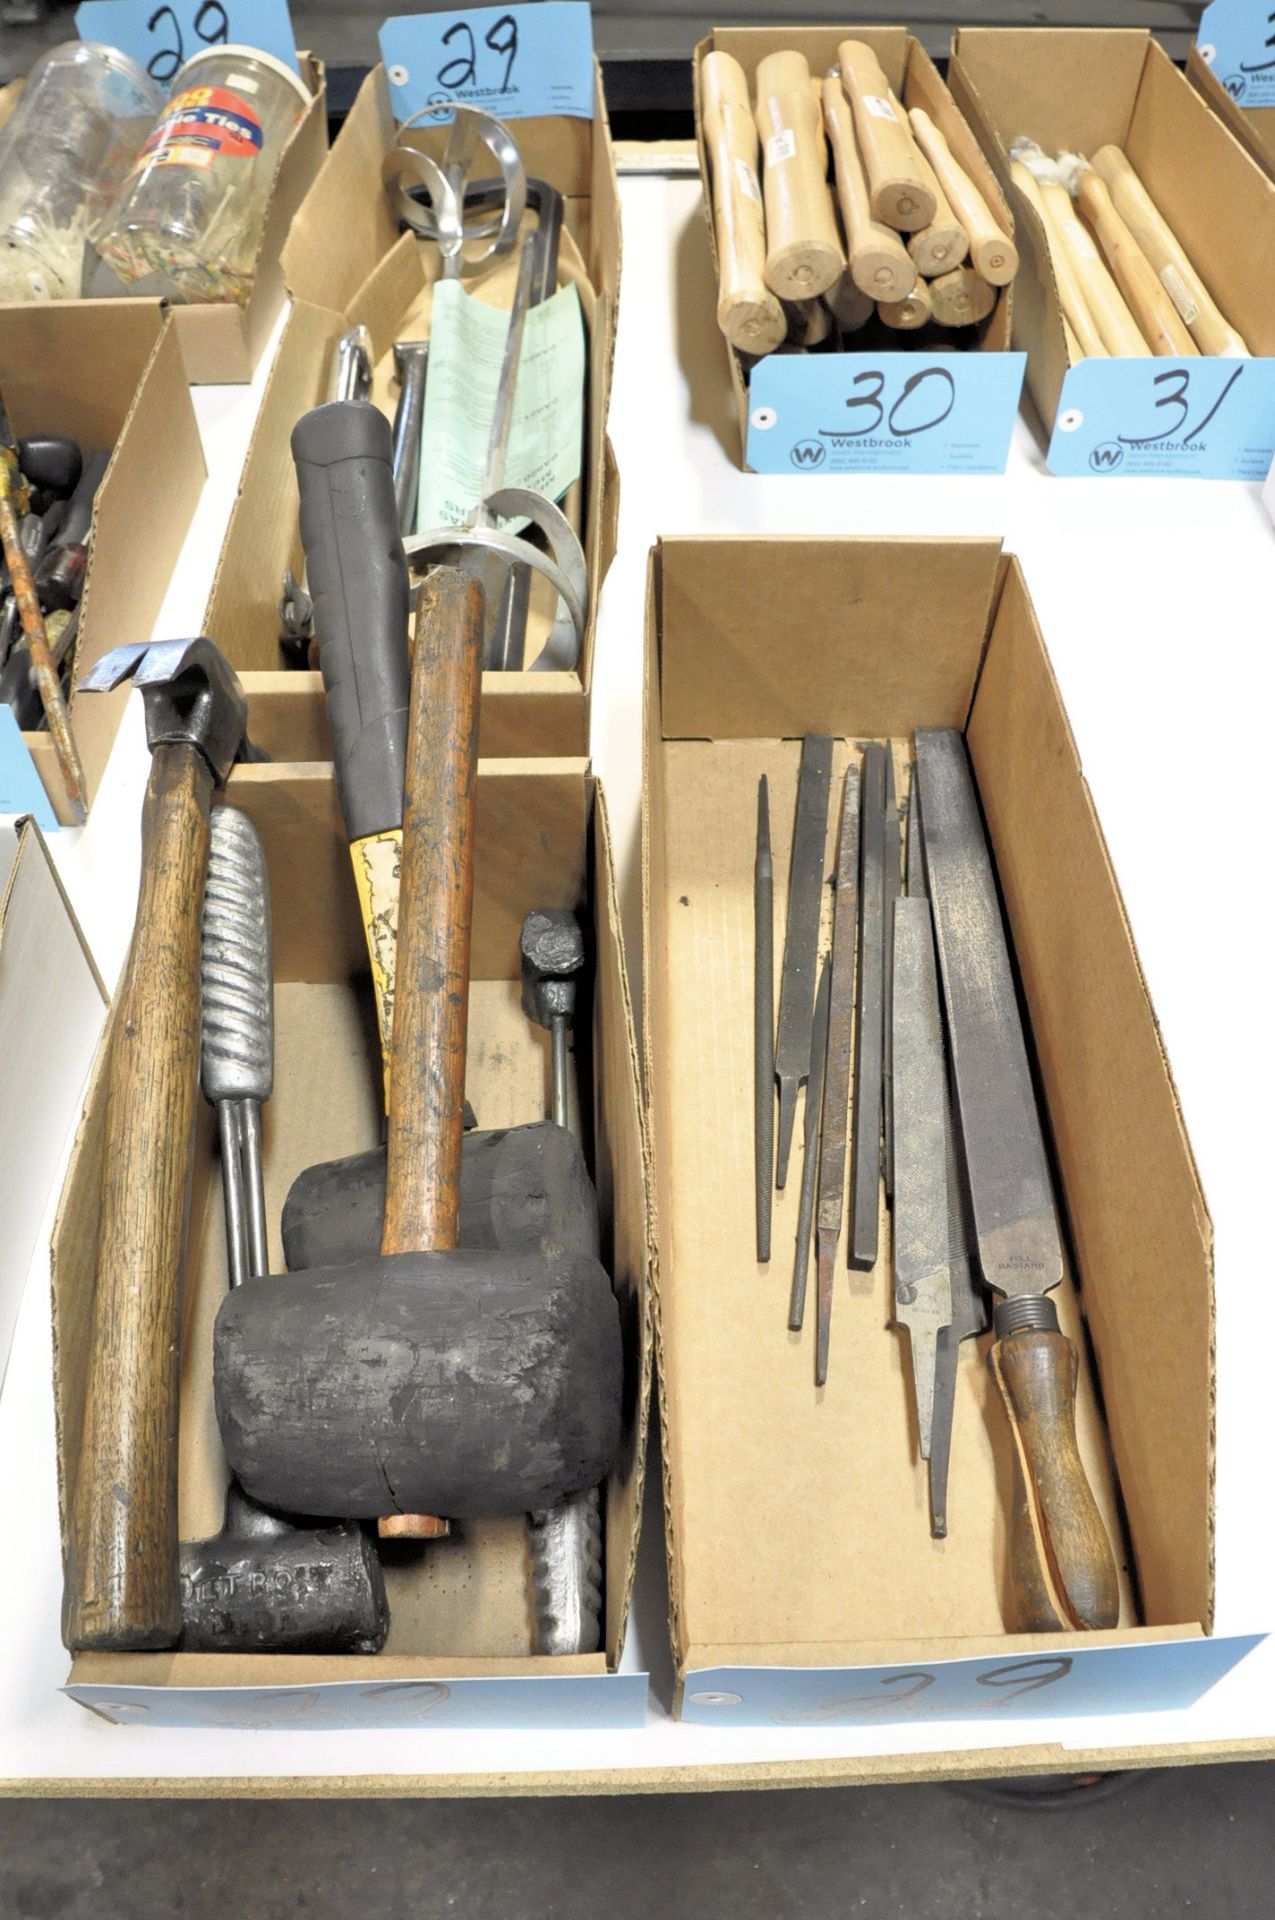 Lot-Mallets, Paint Mixer Attachments, Screwdrivers, Magnet, Cable Ties, etc. in (9) Boxes - Image 5 of 7